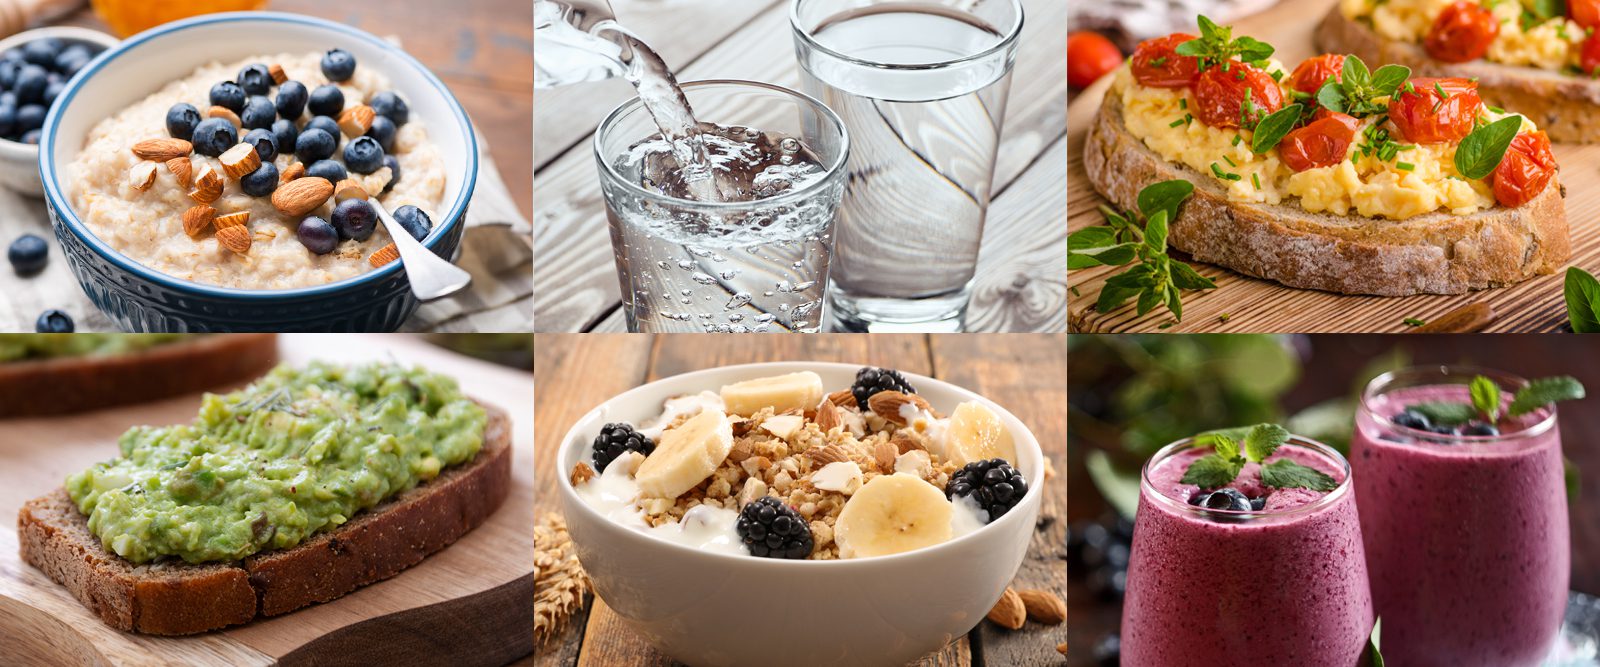 Pictures of breakfast ideas: oatmeal with berries and almonds, glasses of water, toast with eggs and tomato, toast with avocado, cereal with bananas and blackberries and two fruit smoothies